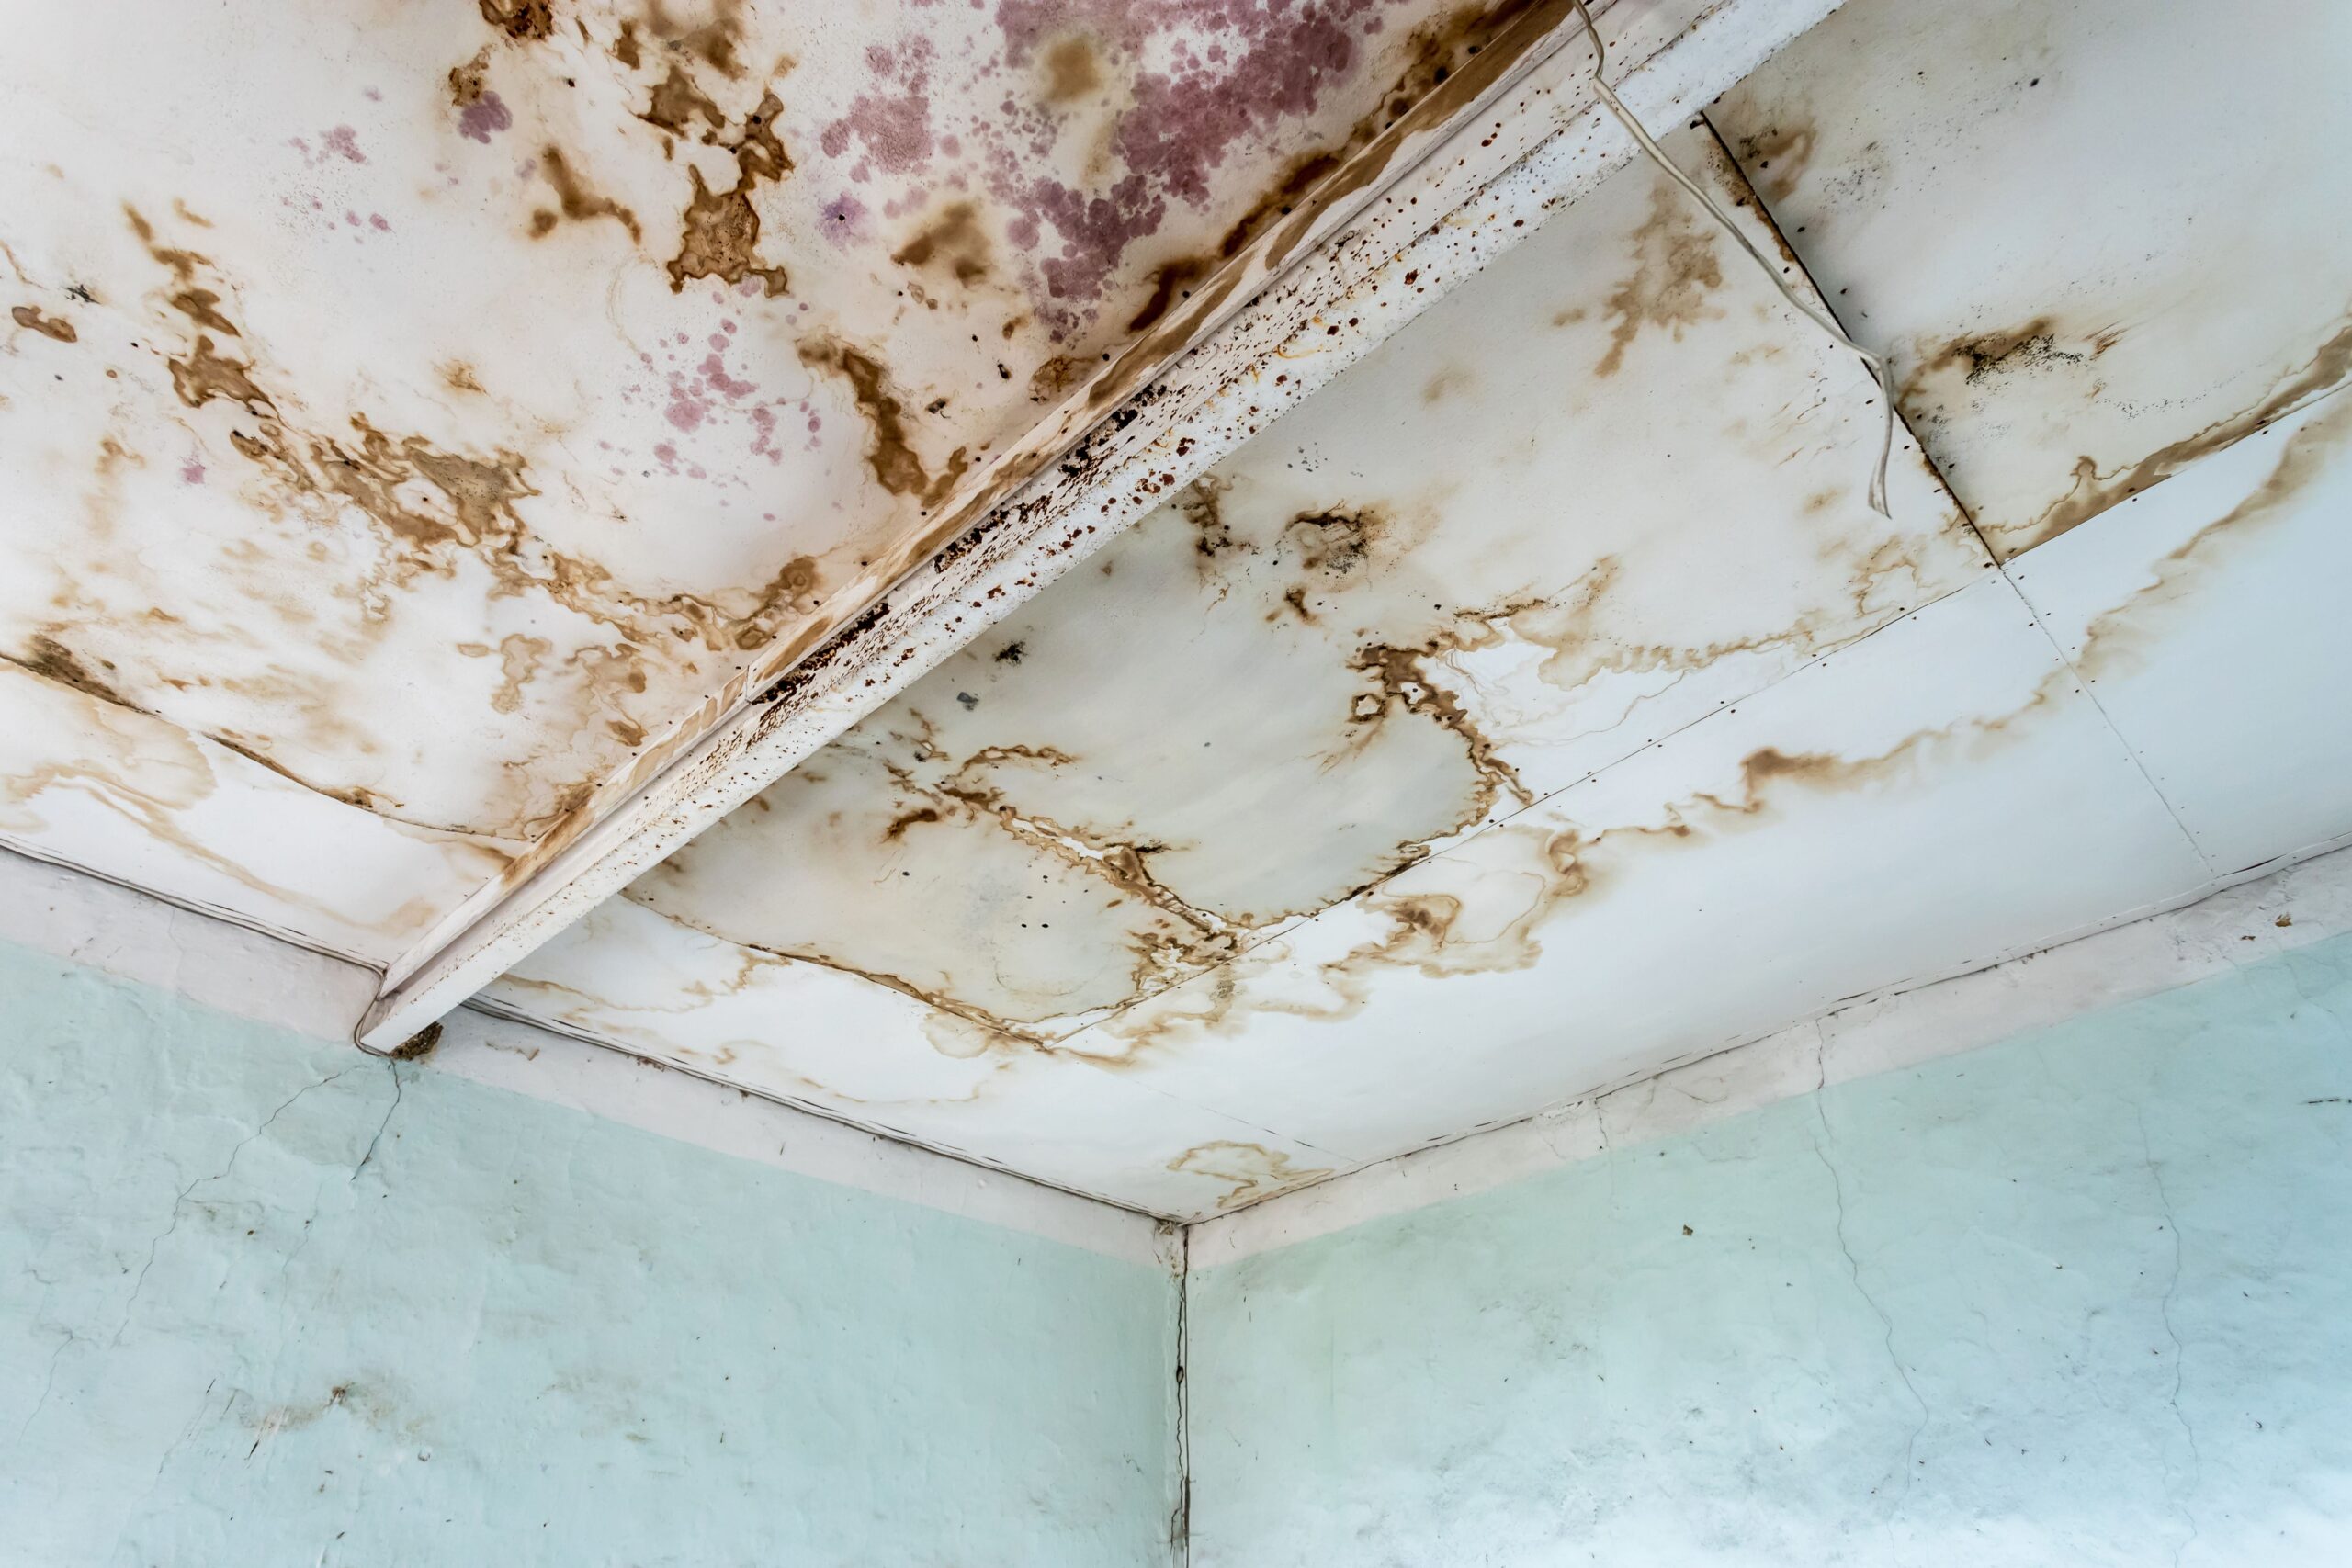 Mold & Mildew? Protective Solutions Can Help